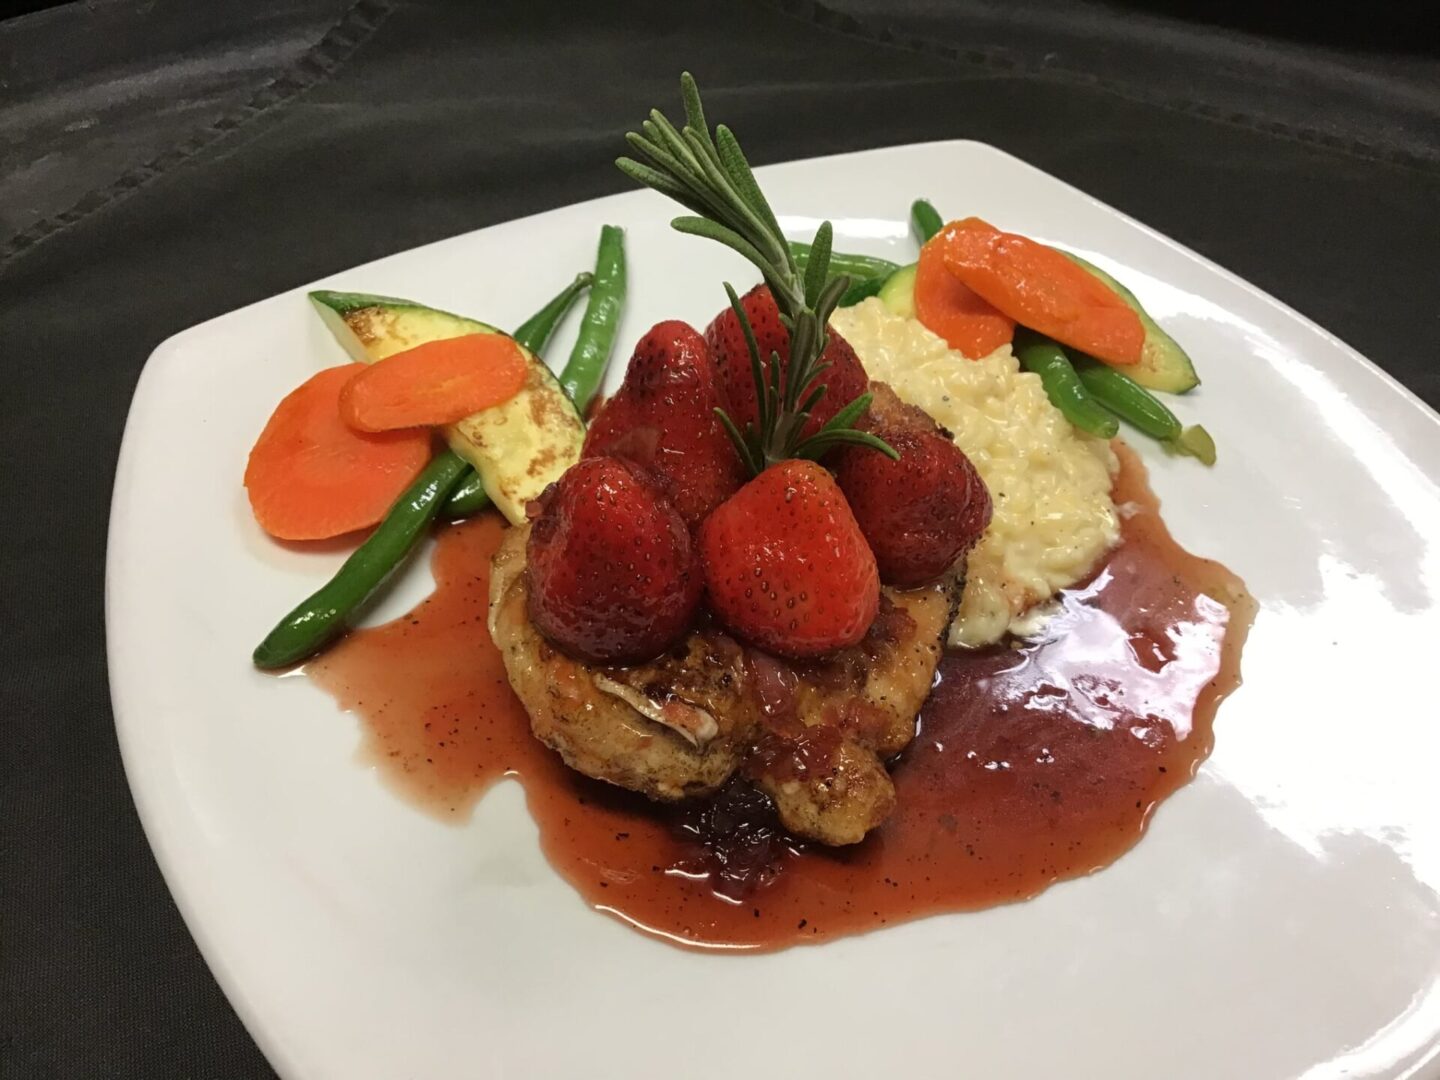 Plated meat dish with garnished with strawberries, carrots, string beans, and topped with a sauce